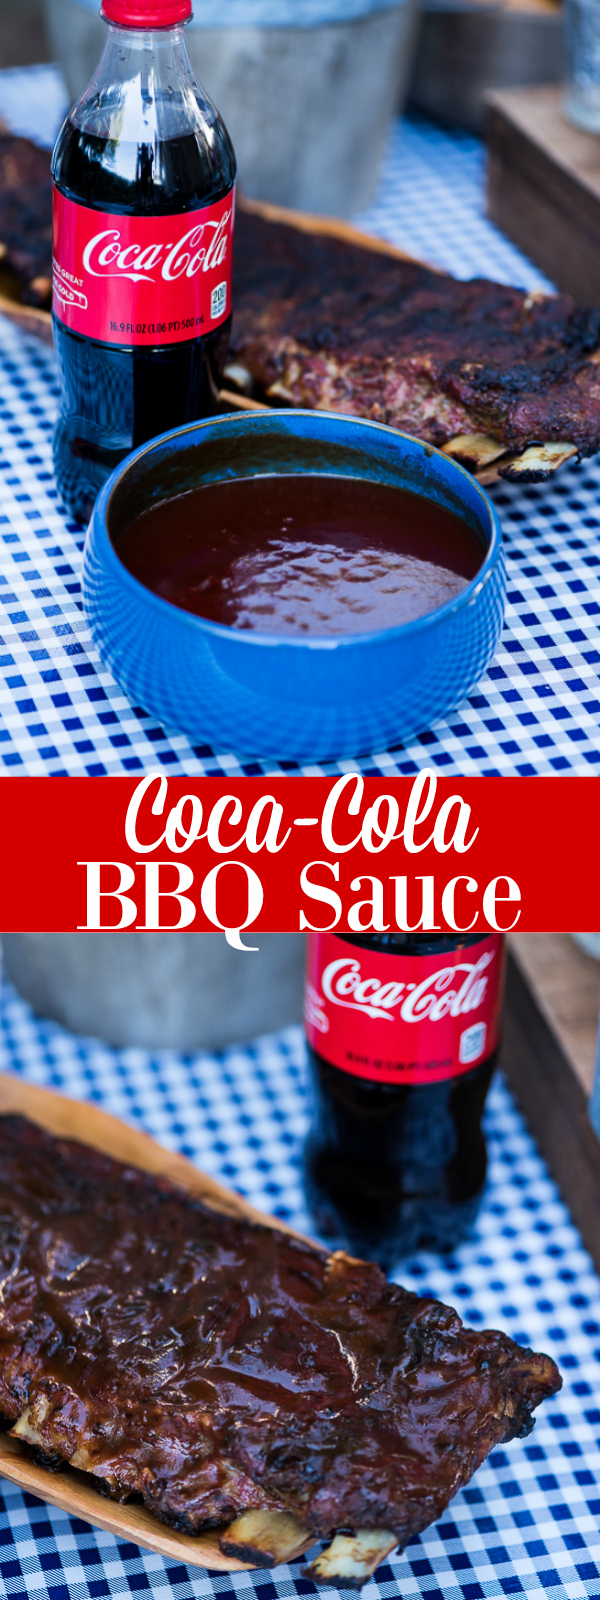 Coca-Cola BBQ Sauce - the recipe is great for ribs, chicken wings and kebabs!